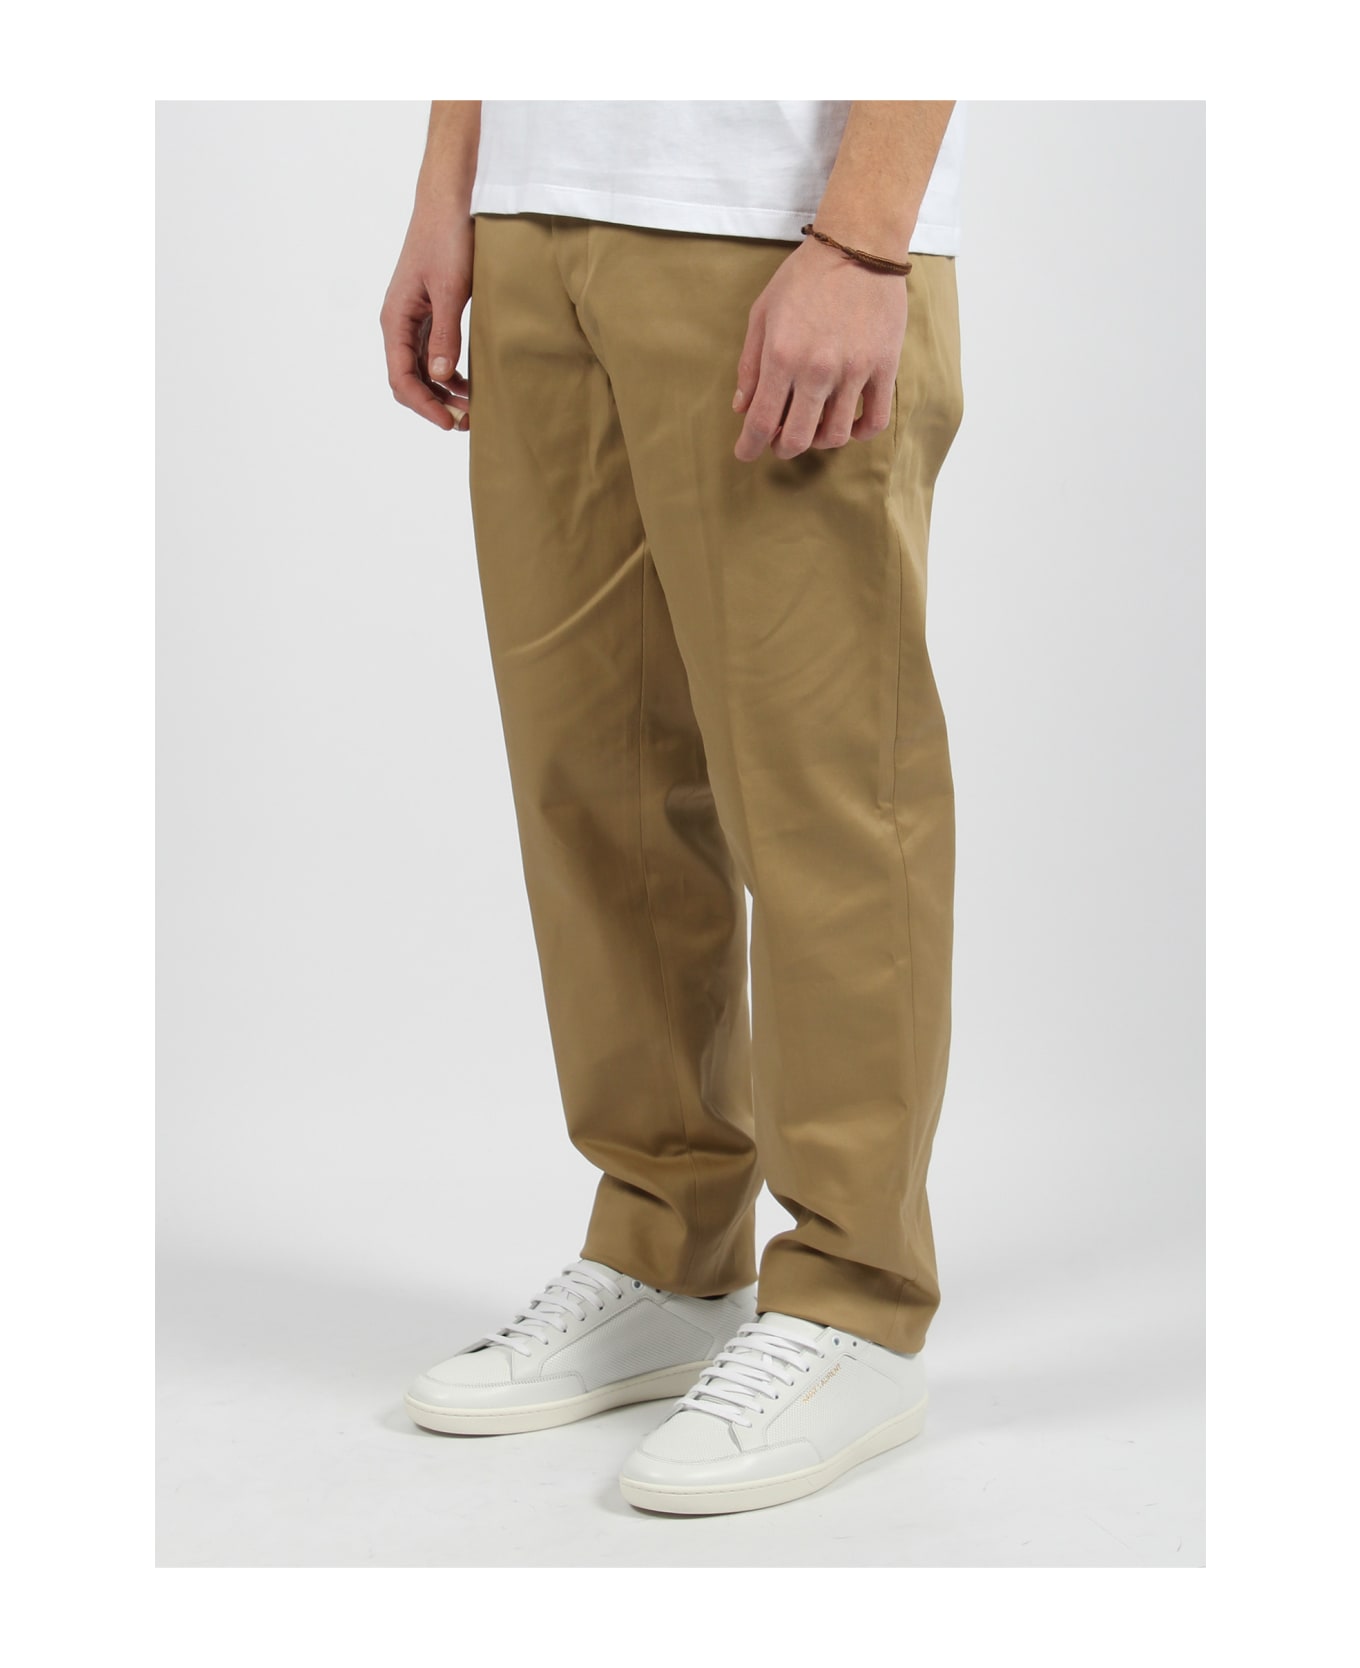 Nine in the Morning Giove Slim Chino Pant - Brown